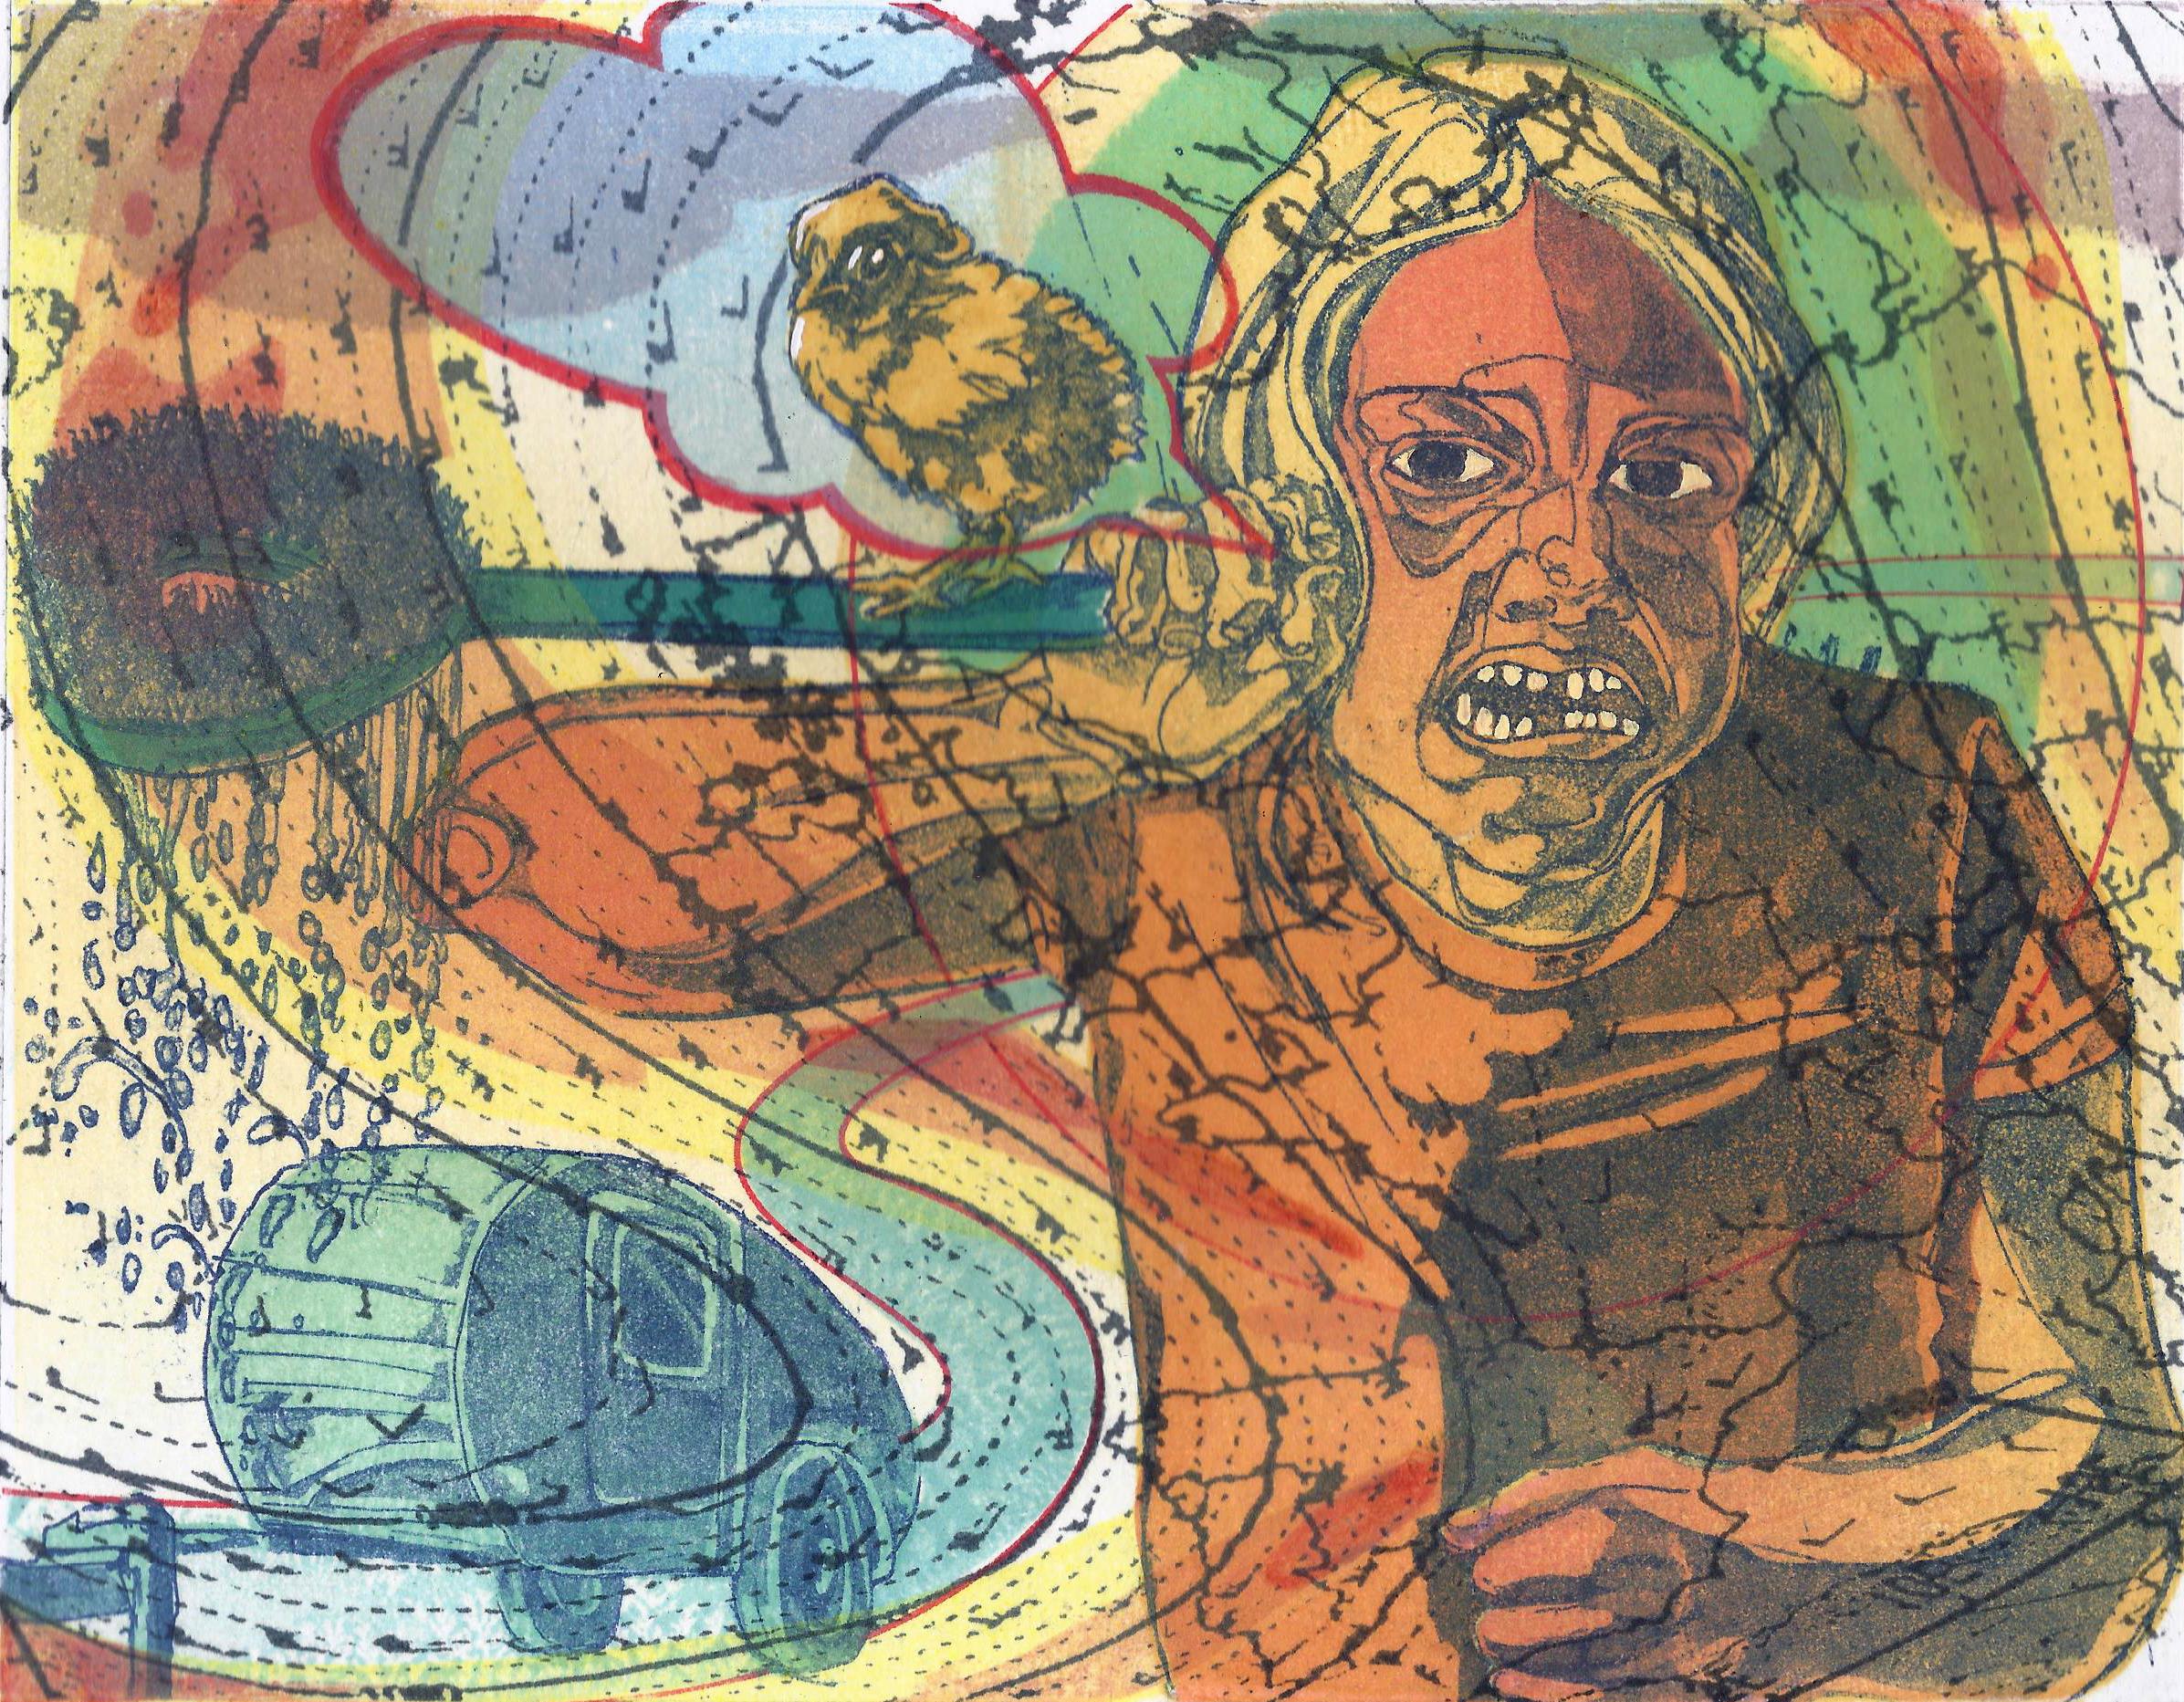 A print of a woman set against an array of abstract objects and colors.